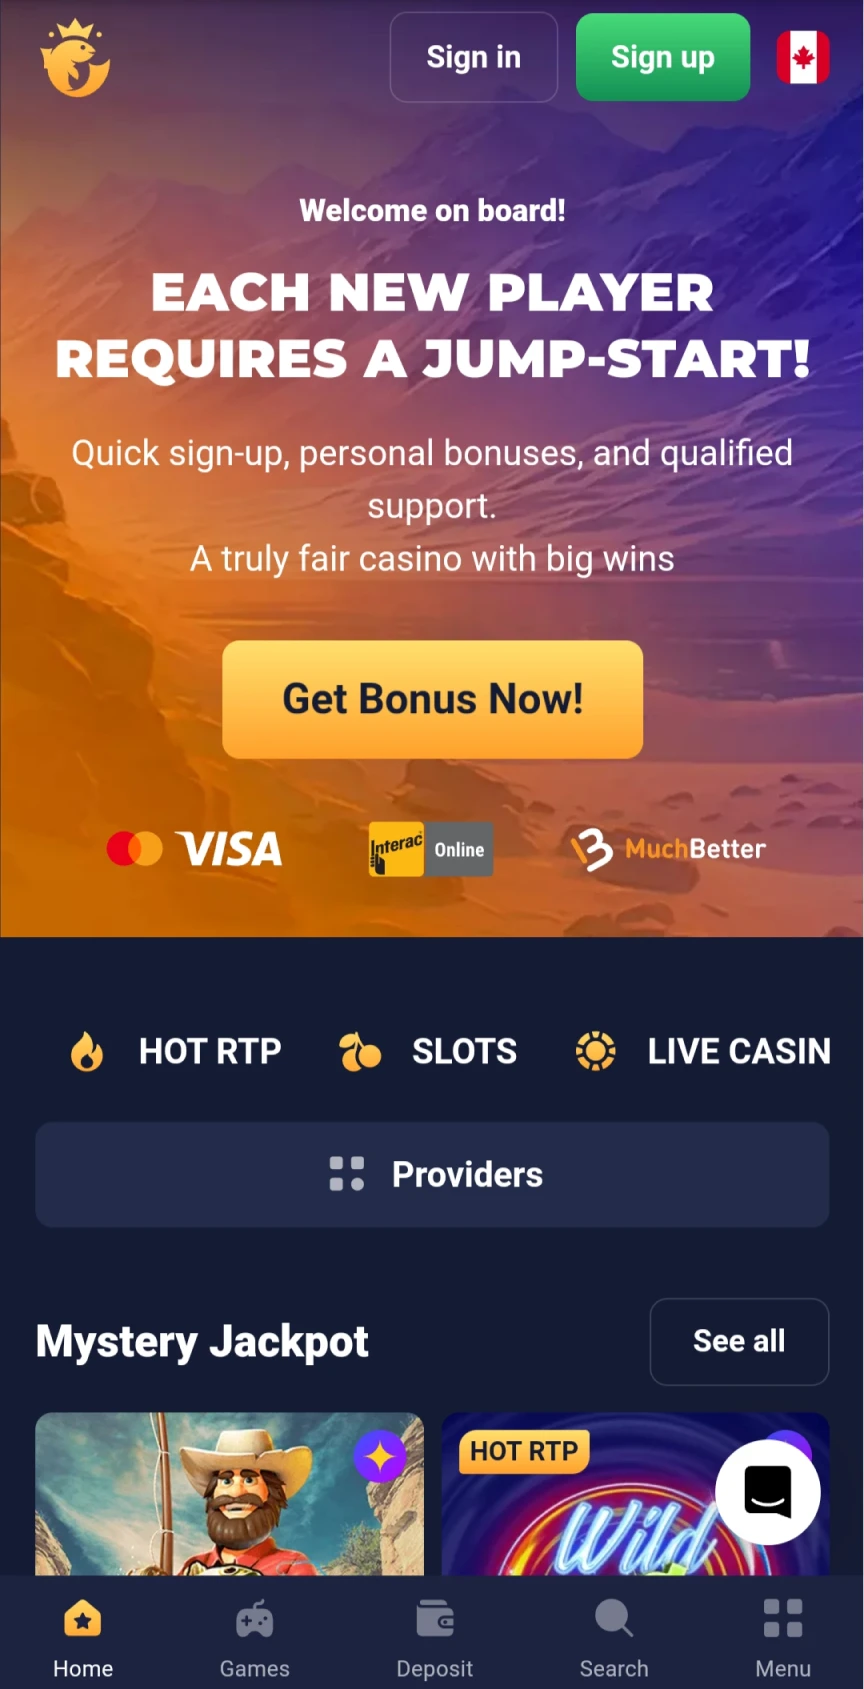 Visit the official Joo Casino page for download on iOS.